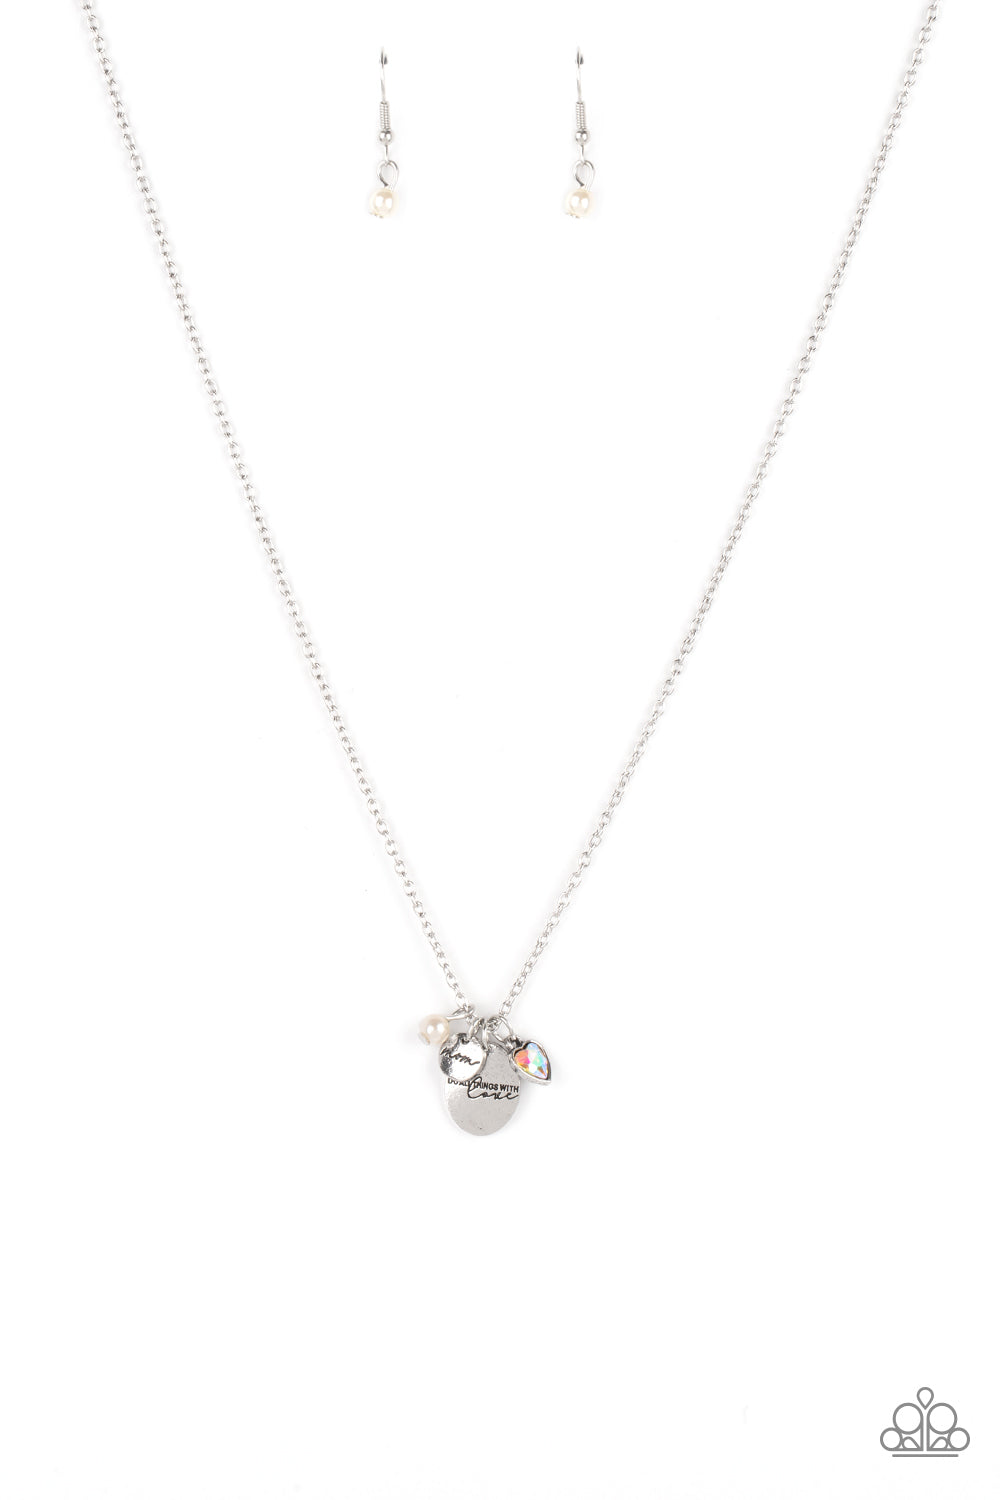 PAPARAZZI | Super Mom - White | Stamped silver disc | Iridescent Heart Necklace